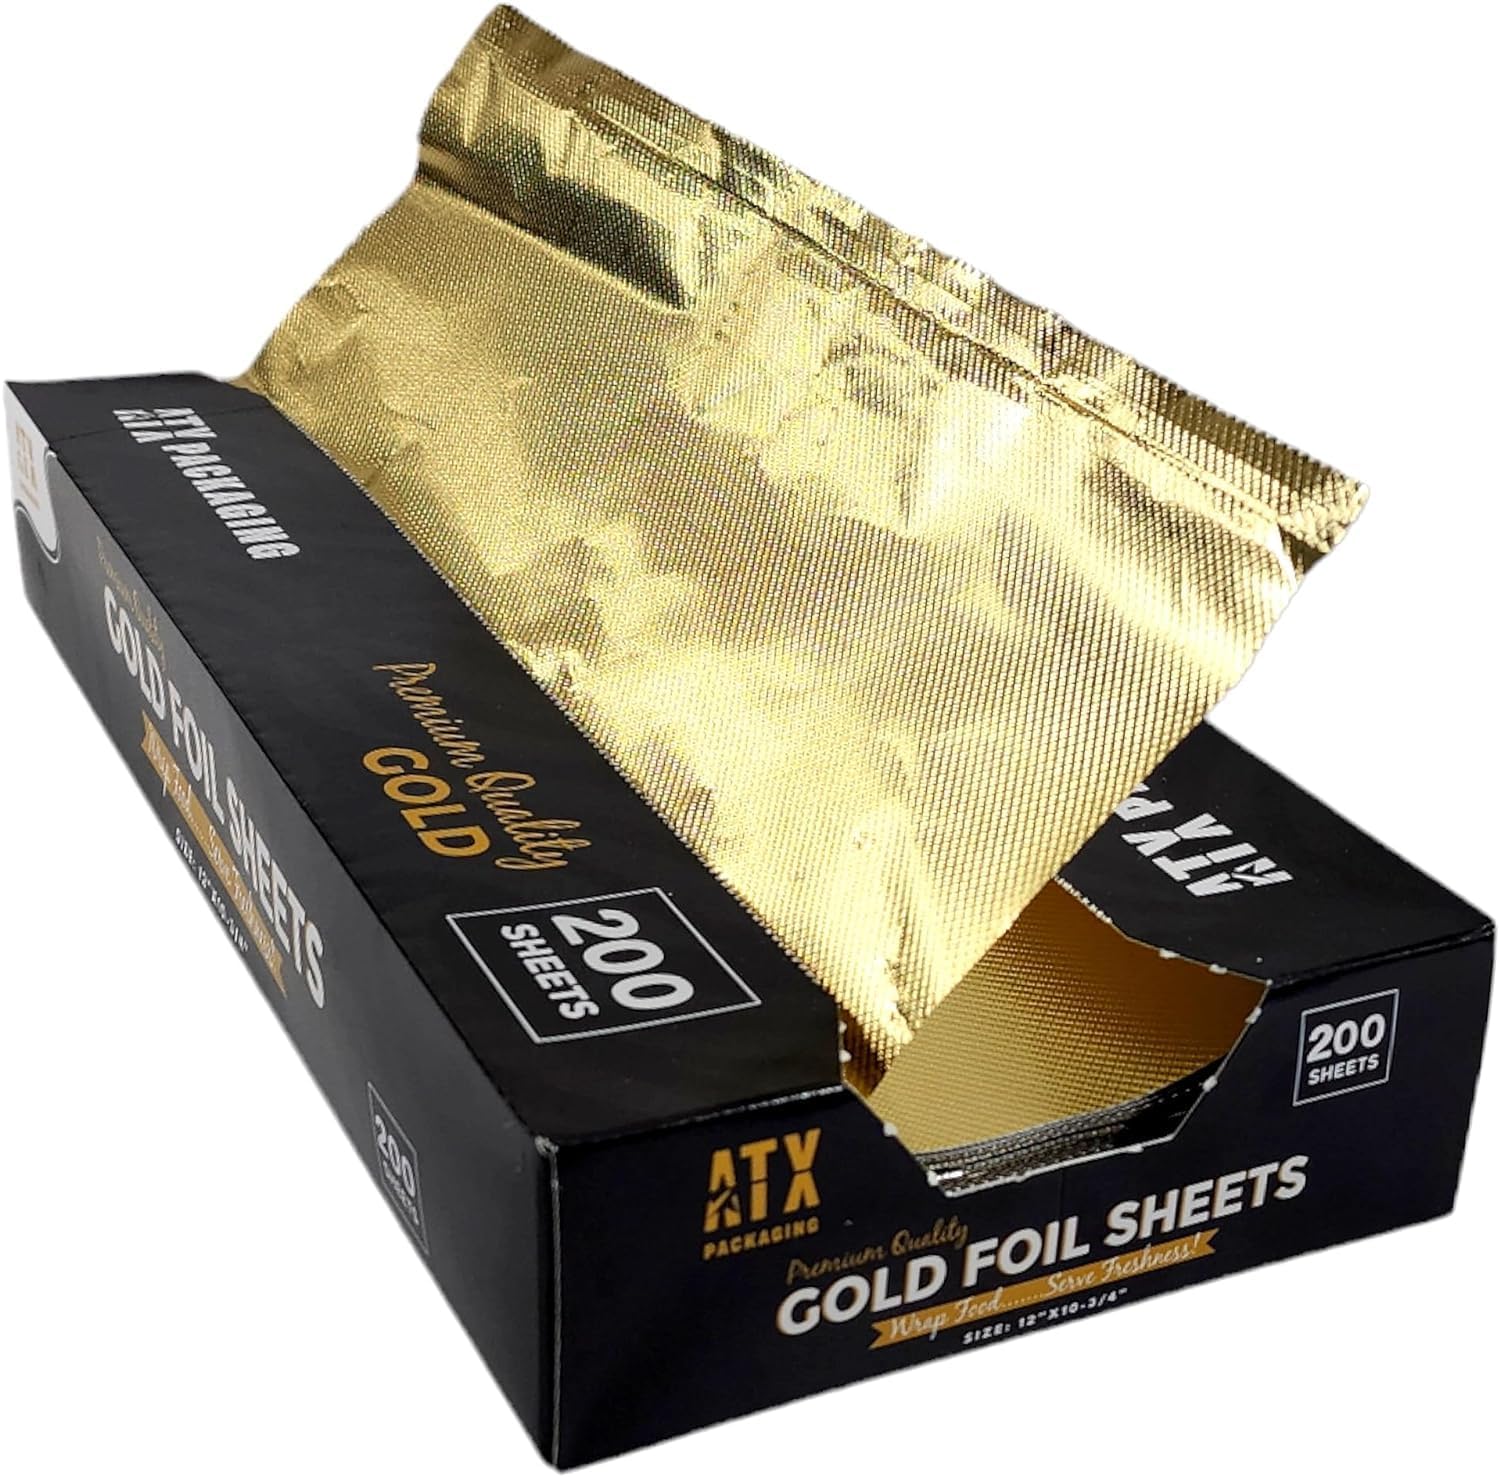 Choice 9 x 10 3/4 Gold / Silver Food Service Interfolded Pop-Up Foil  Sheets - 200/Box